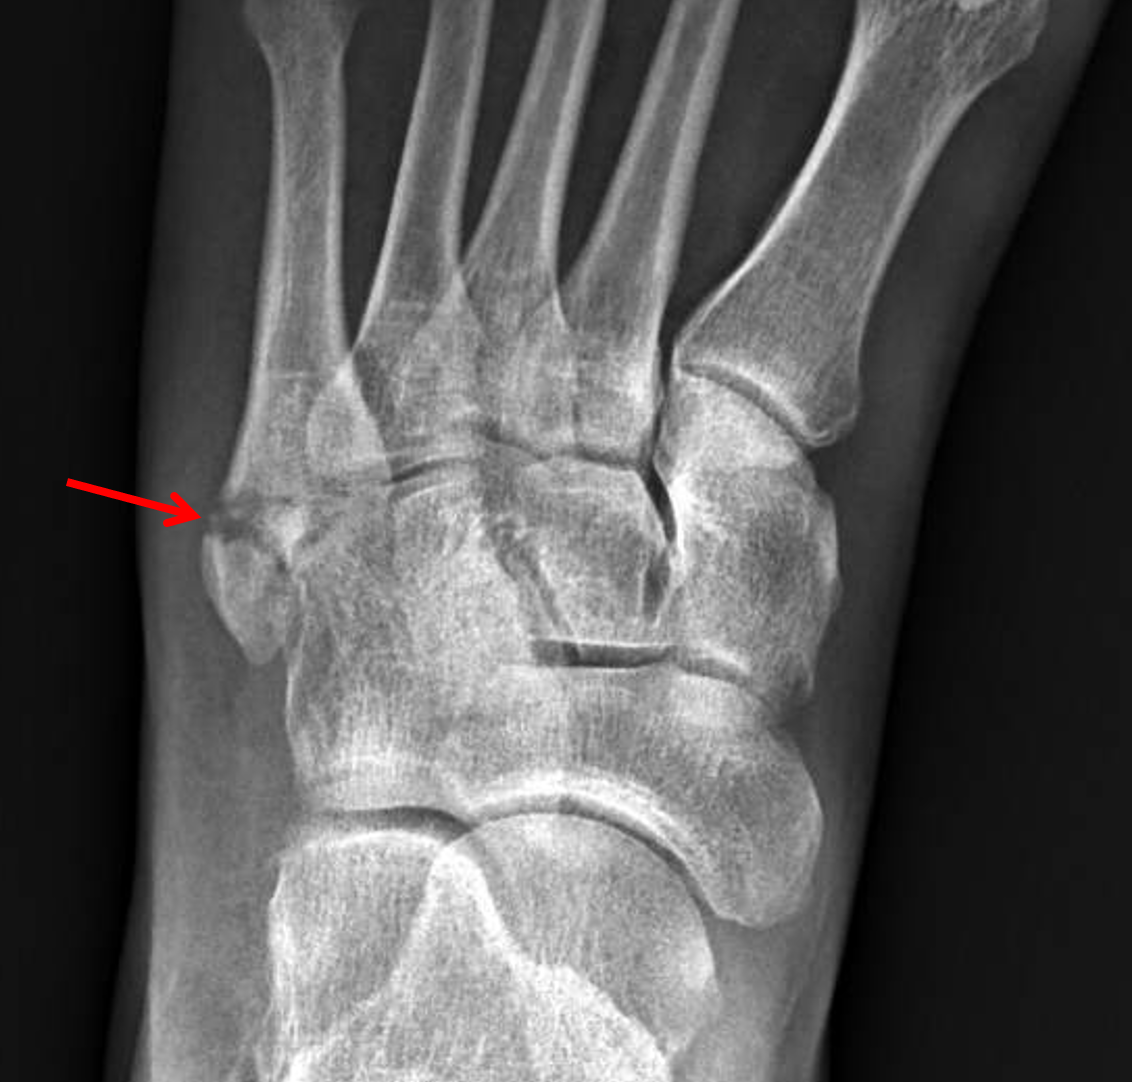 displaced 5th metatarsal fracture